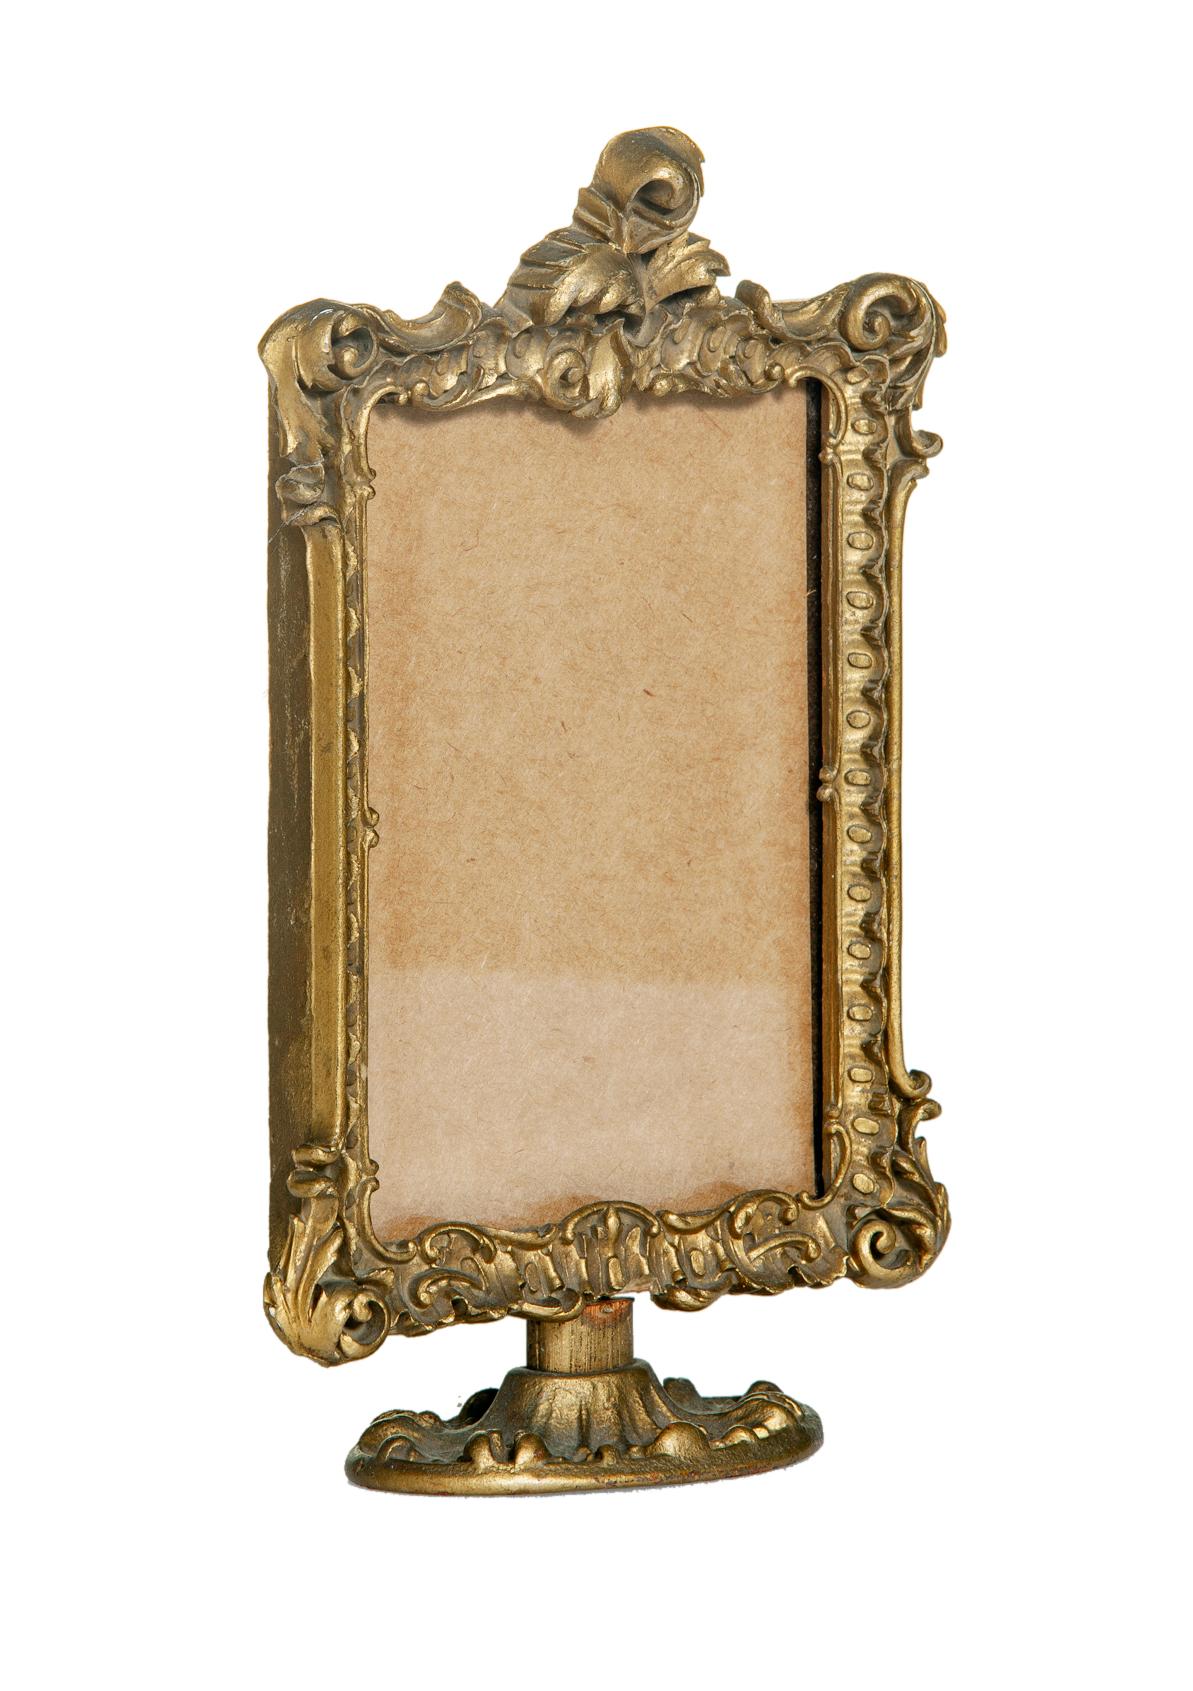 Pretty little French Victorian picture frame sits on an ornate round base. Lavish scrolls & meticulous details.